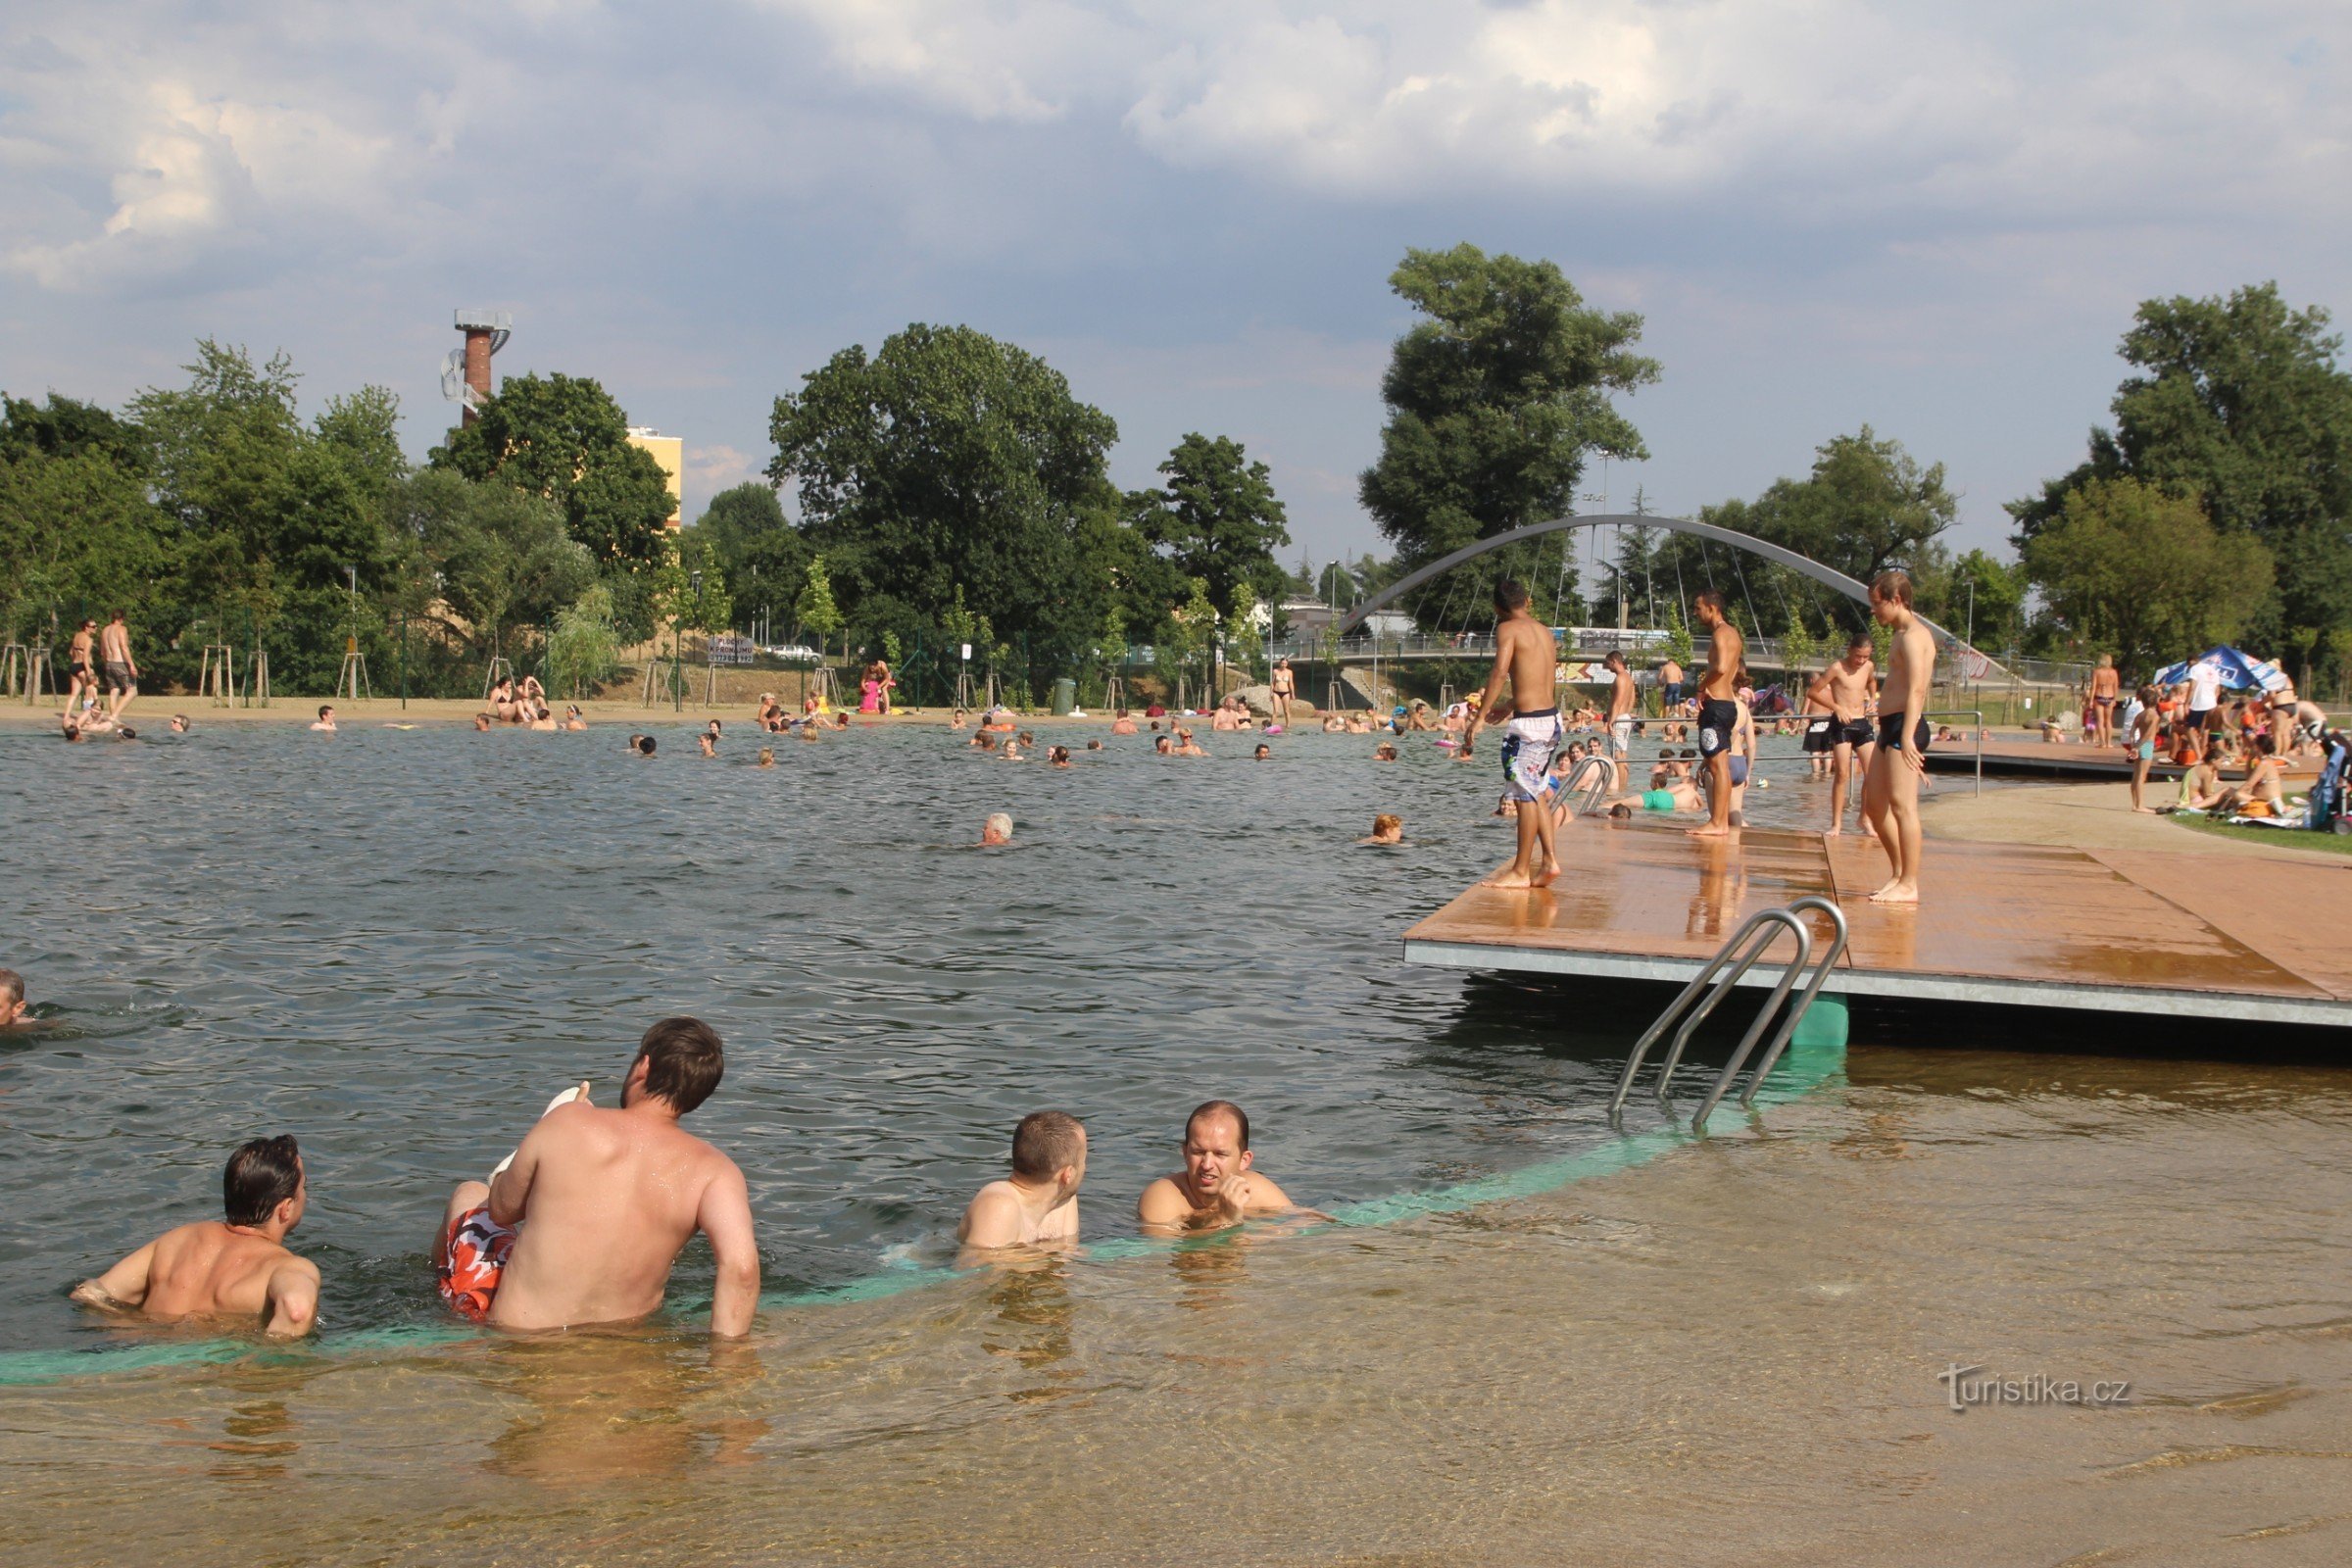 The swimming pool is located near the new cycle bridge over the river Svratka, in the background